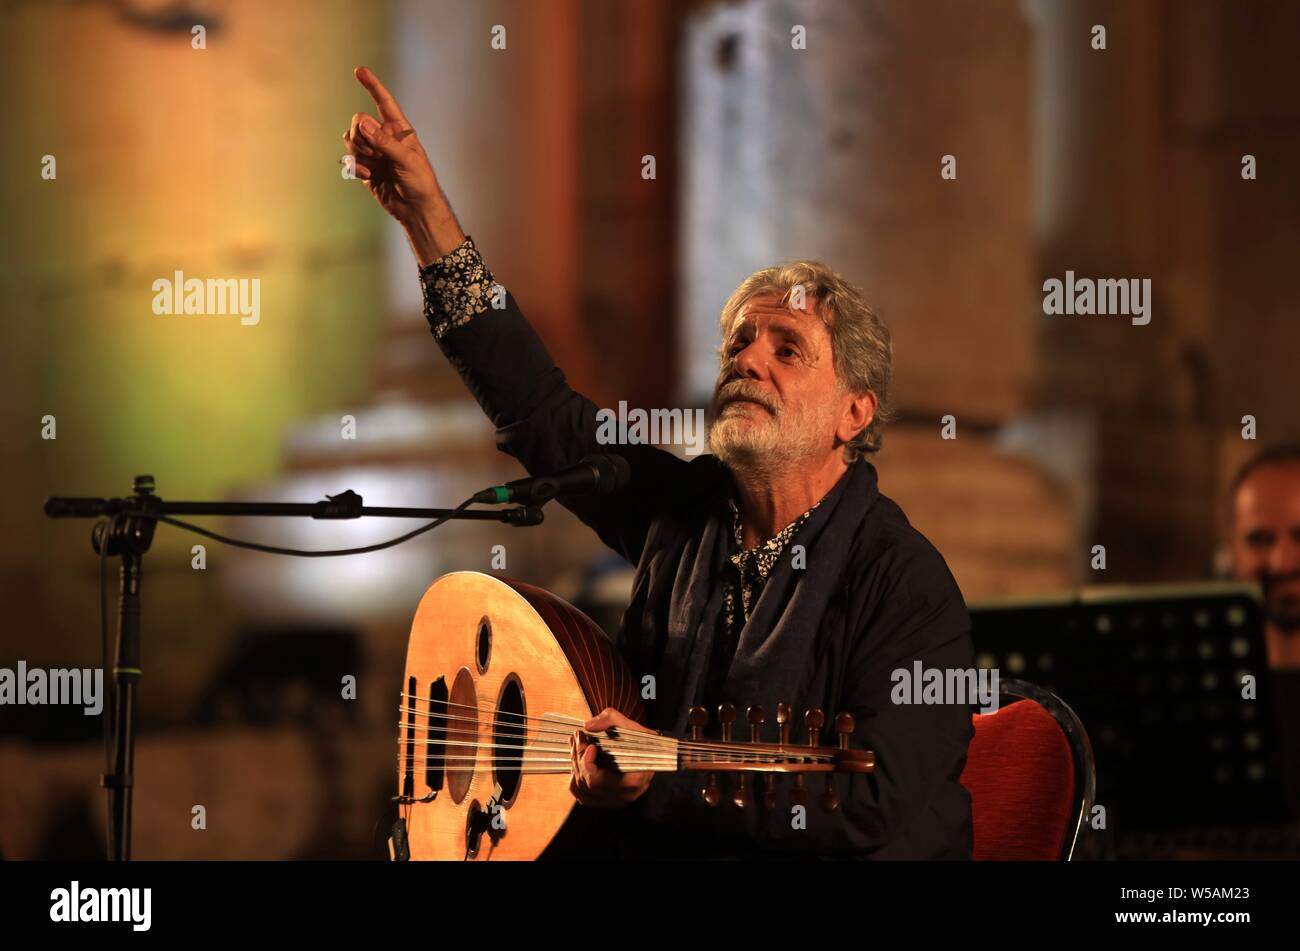 Jerash, Jordan. 27th July, 2019. (190727) -- JERASH, July 27, 2019 (Xinhua) -- Lebanese singer Marcel Khalifa performs during the 2019 Jerash Festival of Culture and Arts at the Jerash archeological site in Jerash, Jordan, July 26, 2019. The Jerash festival is held in the ancient Greco-Roman town of Jerash, 48 km north of Amman, known in the past as Gerasa. In 2011, the government revived the festival, which was first launched in 1981, after a four-year suspension. This year's festival kicked off on the night of July 18 and would last for 10 days. (Photo by Mohammad Abu Ghosh/Xinhua) Credit: X Stock Photo